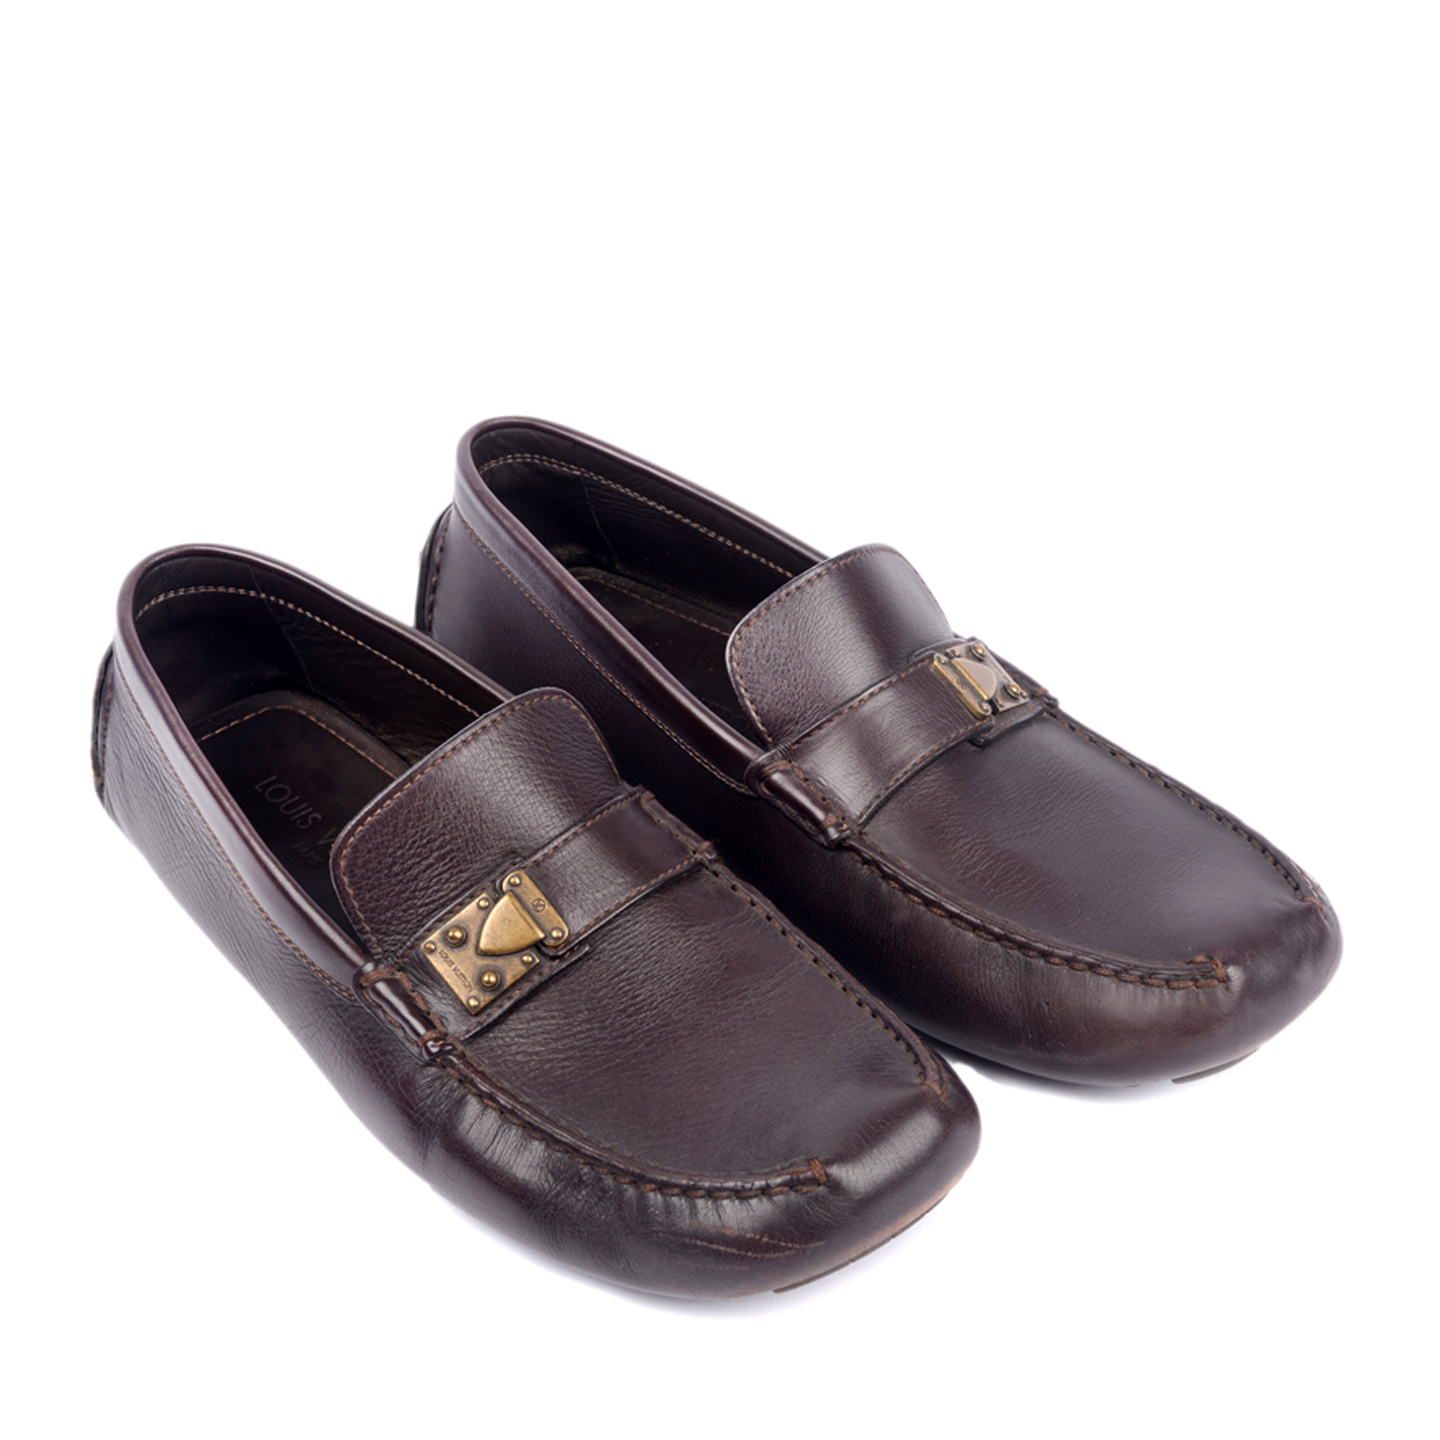 Louis Vuitton Lombok Driving Loafers Size 44 - LabelCentric